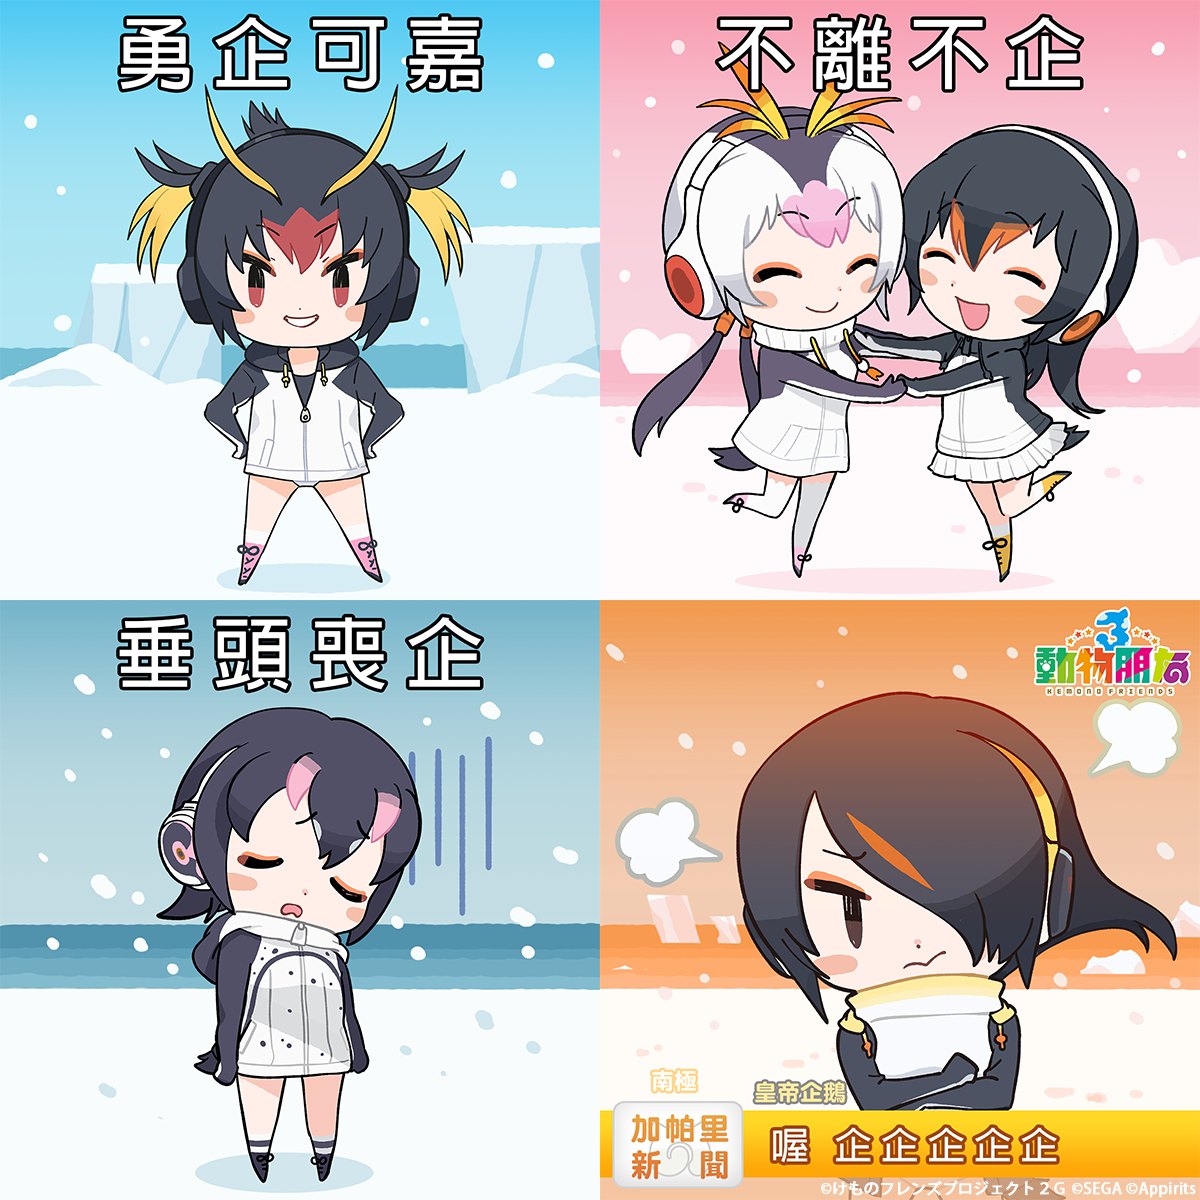 Official PPP Chibi art posted by KF3 Taiwan Facebook account in order to celebrate World Penguin Day.